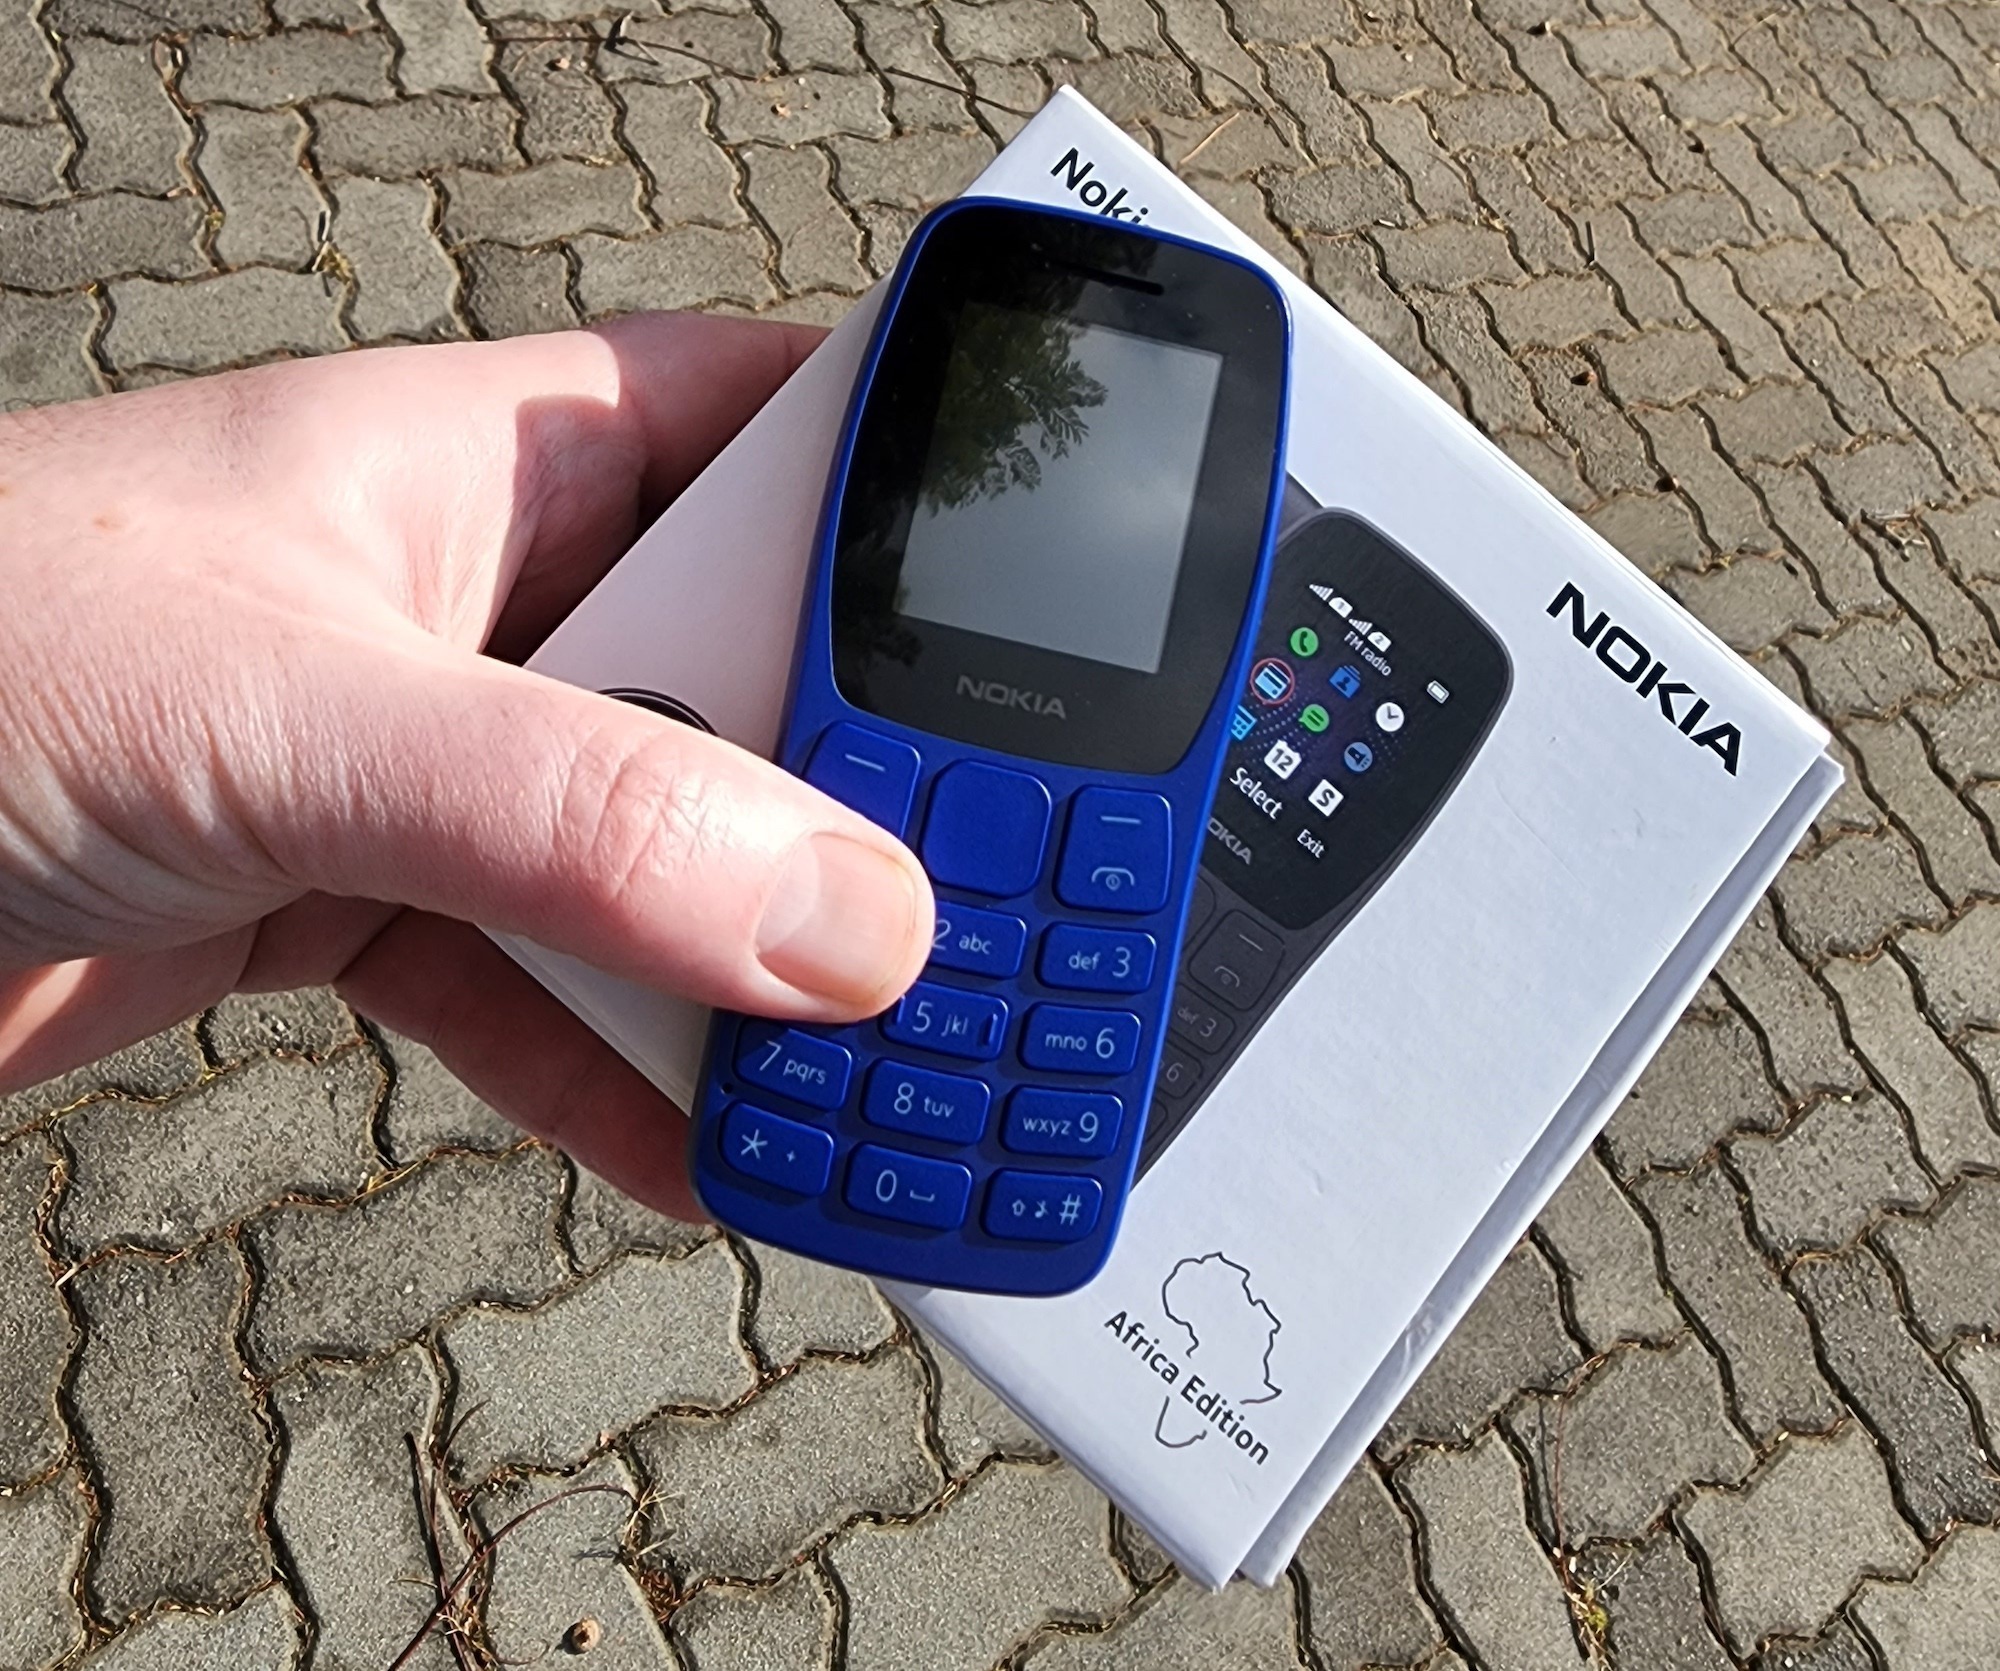 Nokia 105 Africa Edition (dual SIM) - This Is Your Grandfather's